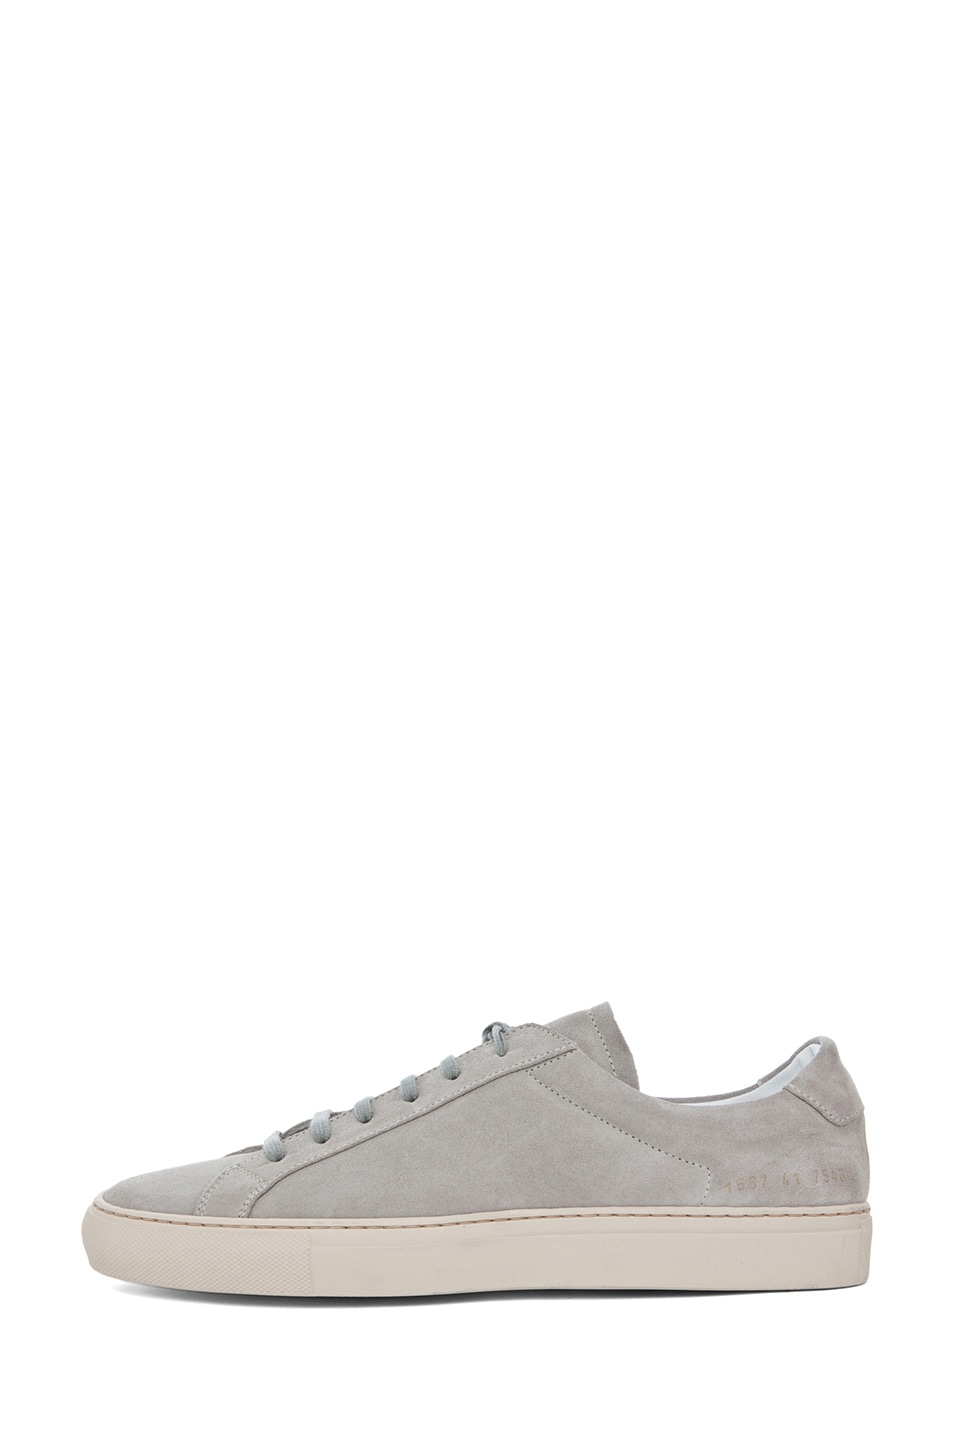 Image 1 of Common Projects Achilles Vintage Suede Shoe in Grey